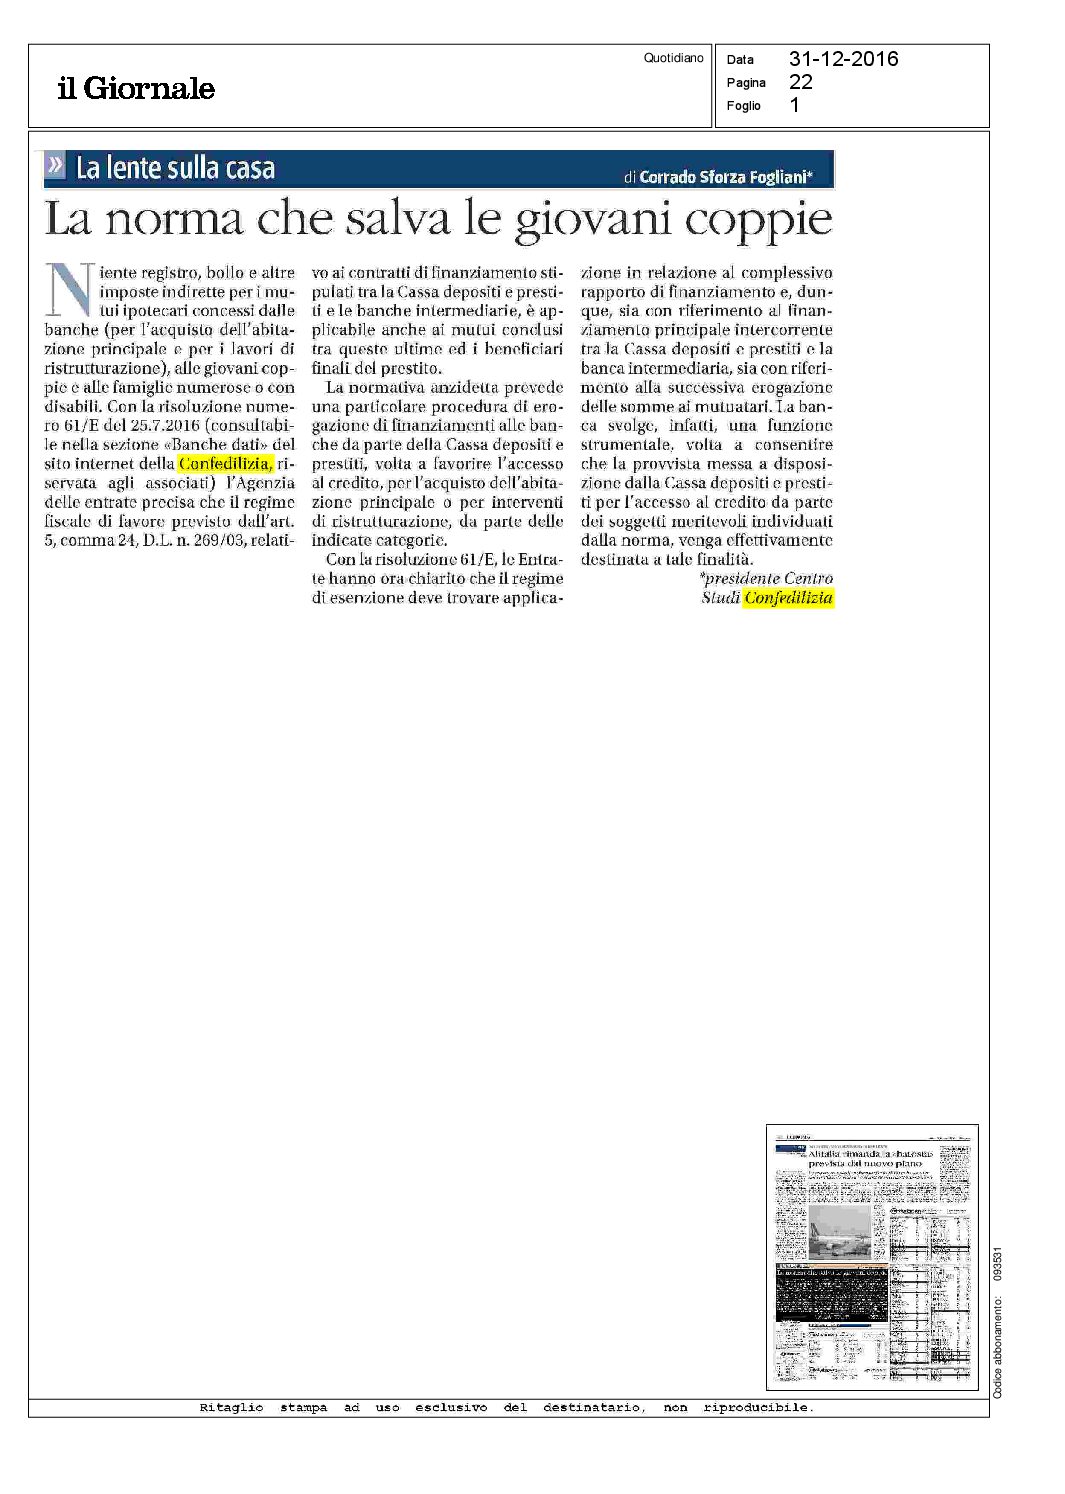 Giornale_31.12.16